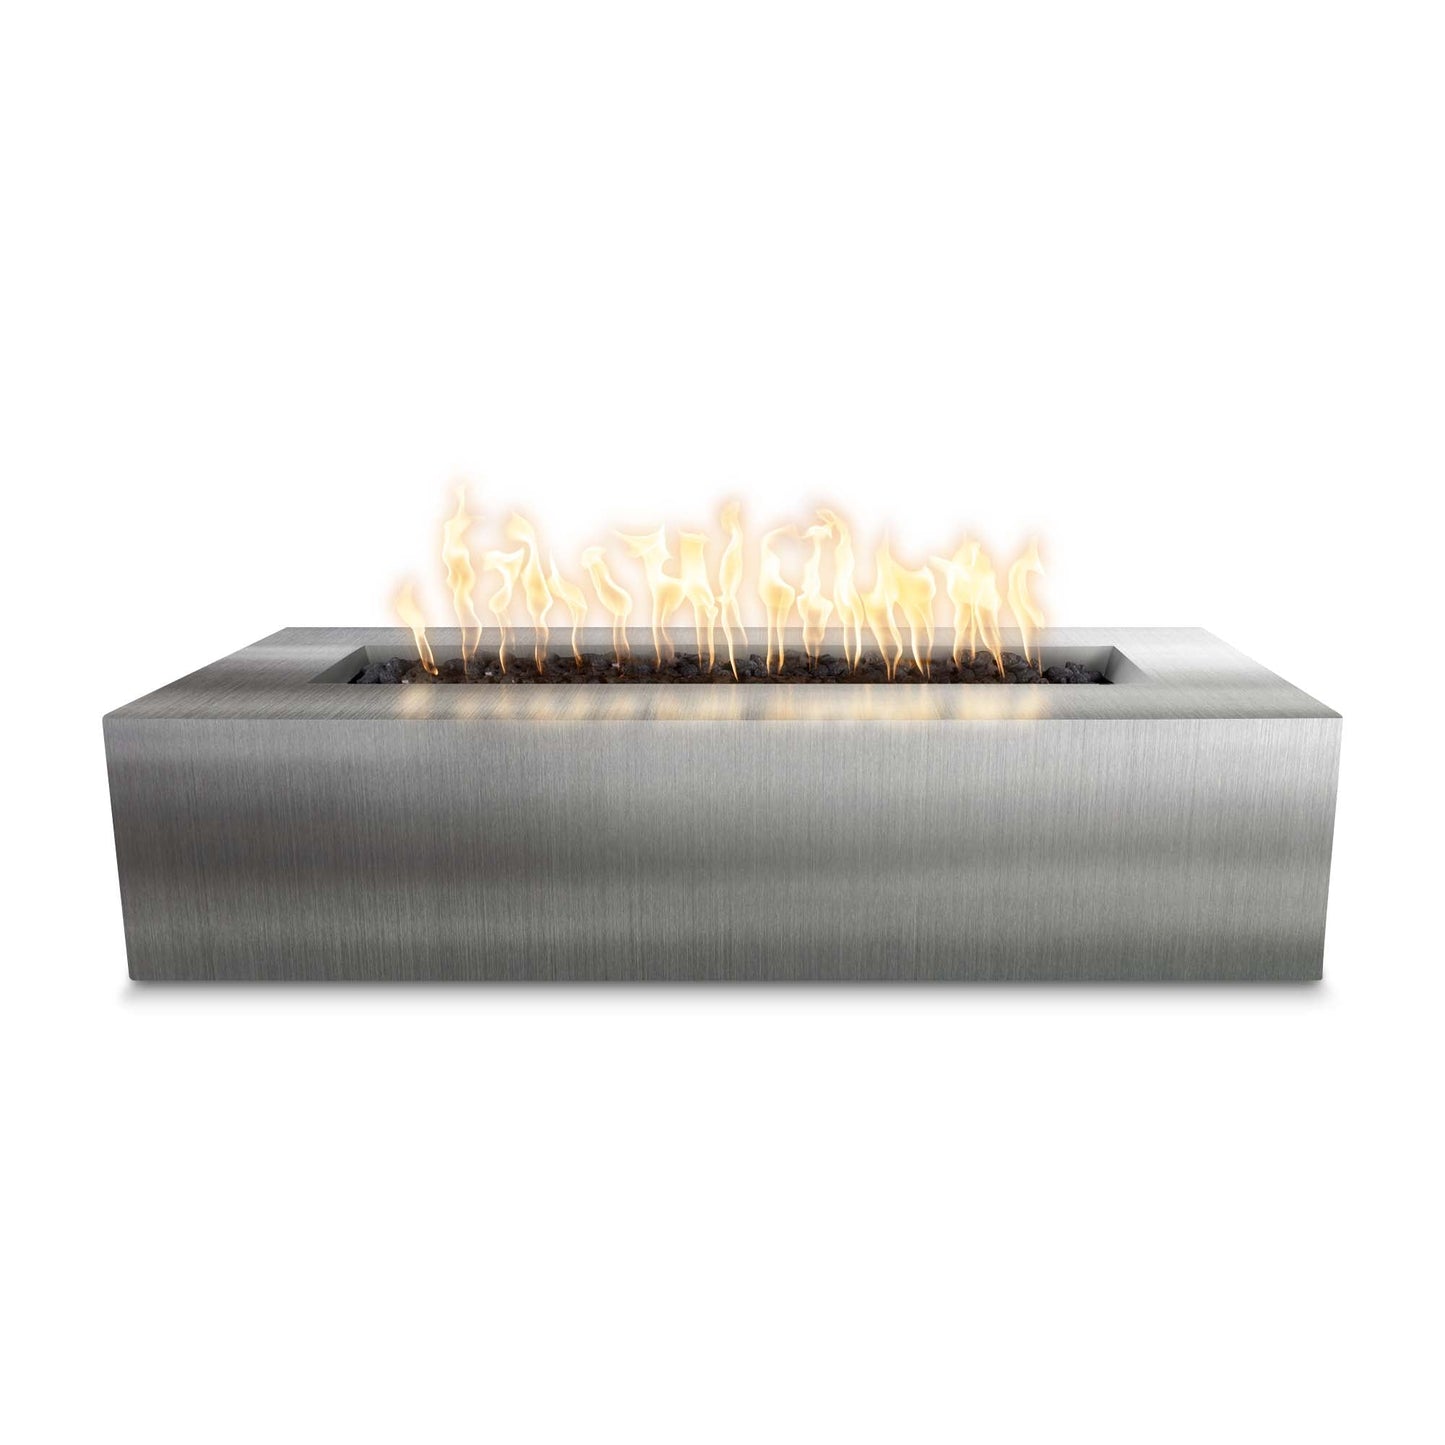 The Outdoor Plus Rectangular Regal 60" Hammered Copper Liquid Propane Fire Pit with Match Lit with Flame Sense Ignition